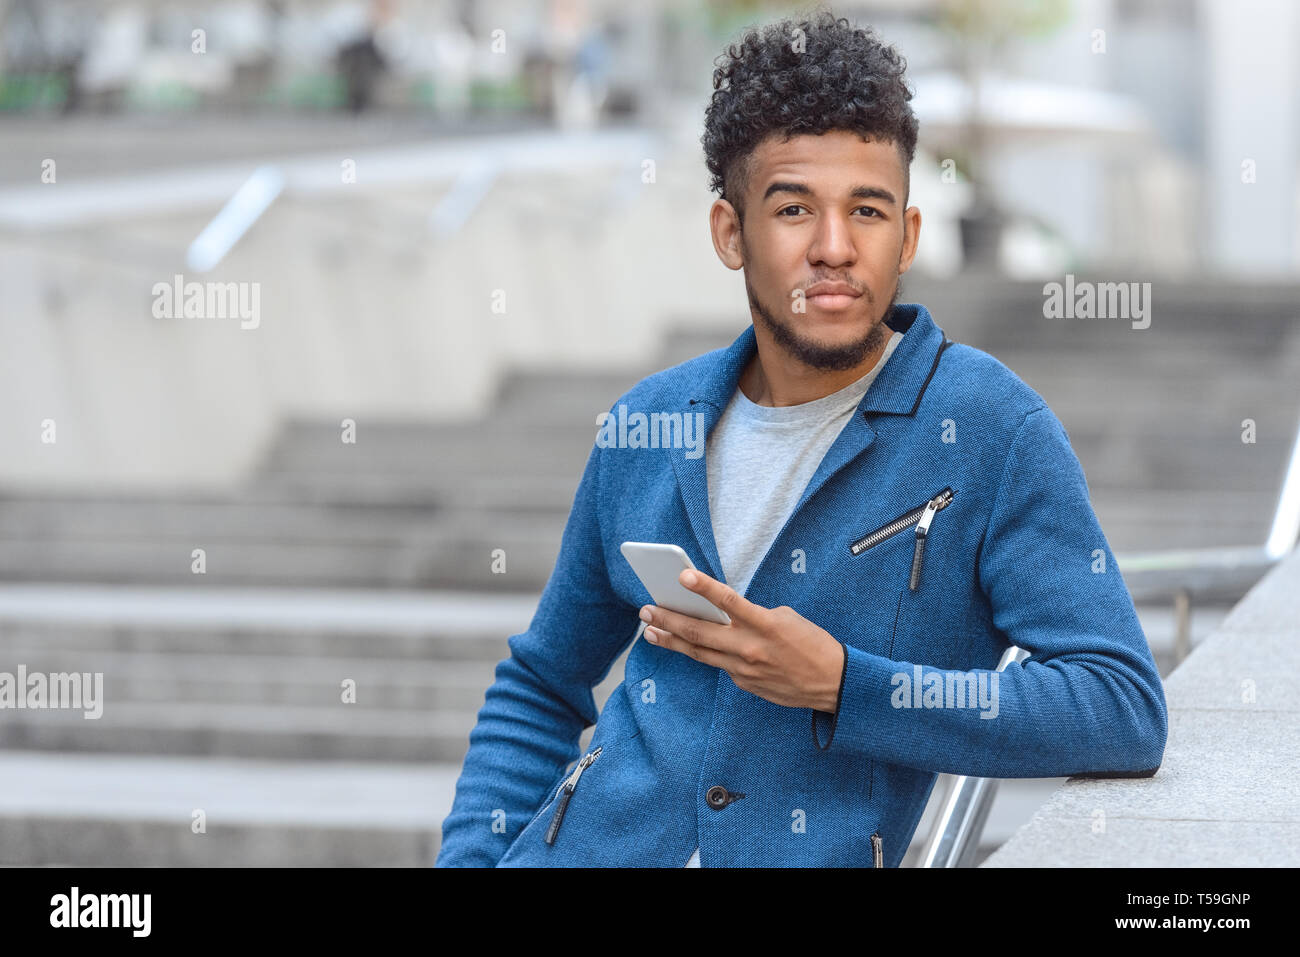 Young mulatto man standing leaning on concrete fence on city street holding smartphone looking camera concerned close-up blurred background Stock Photo